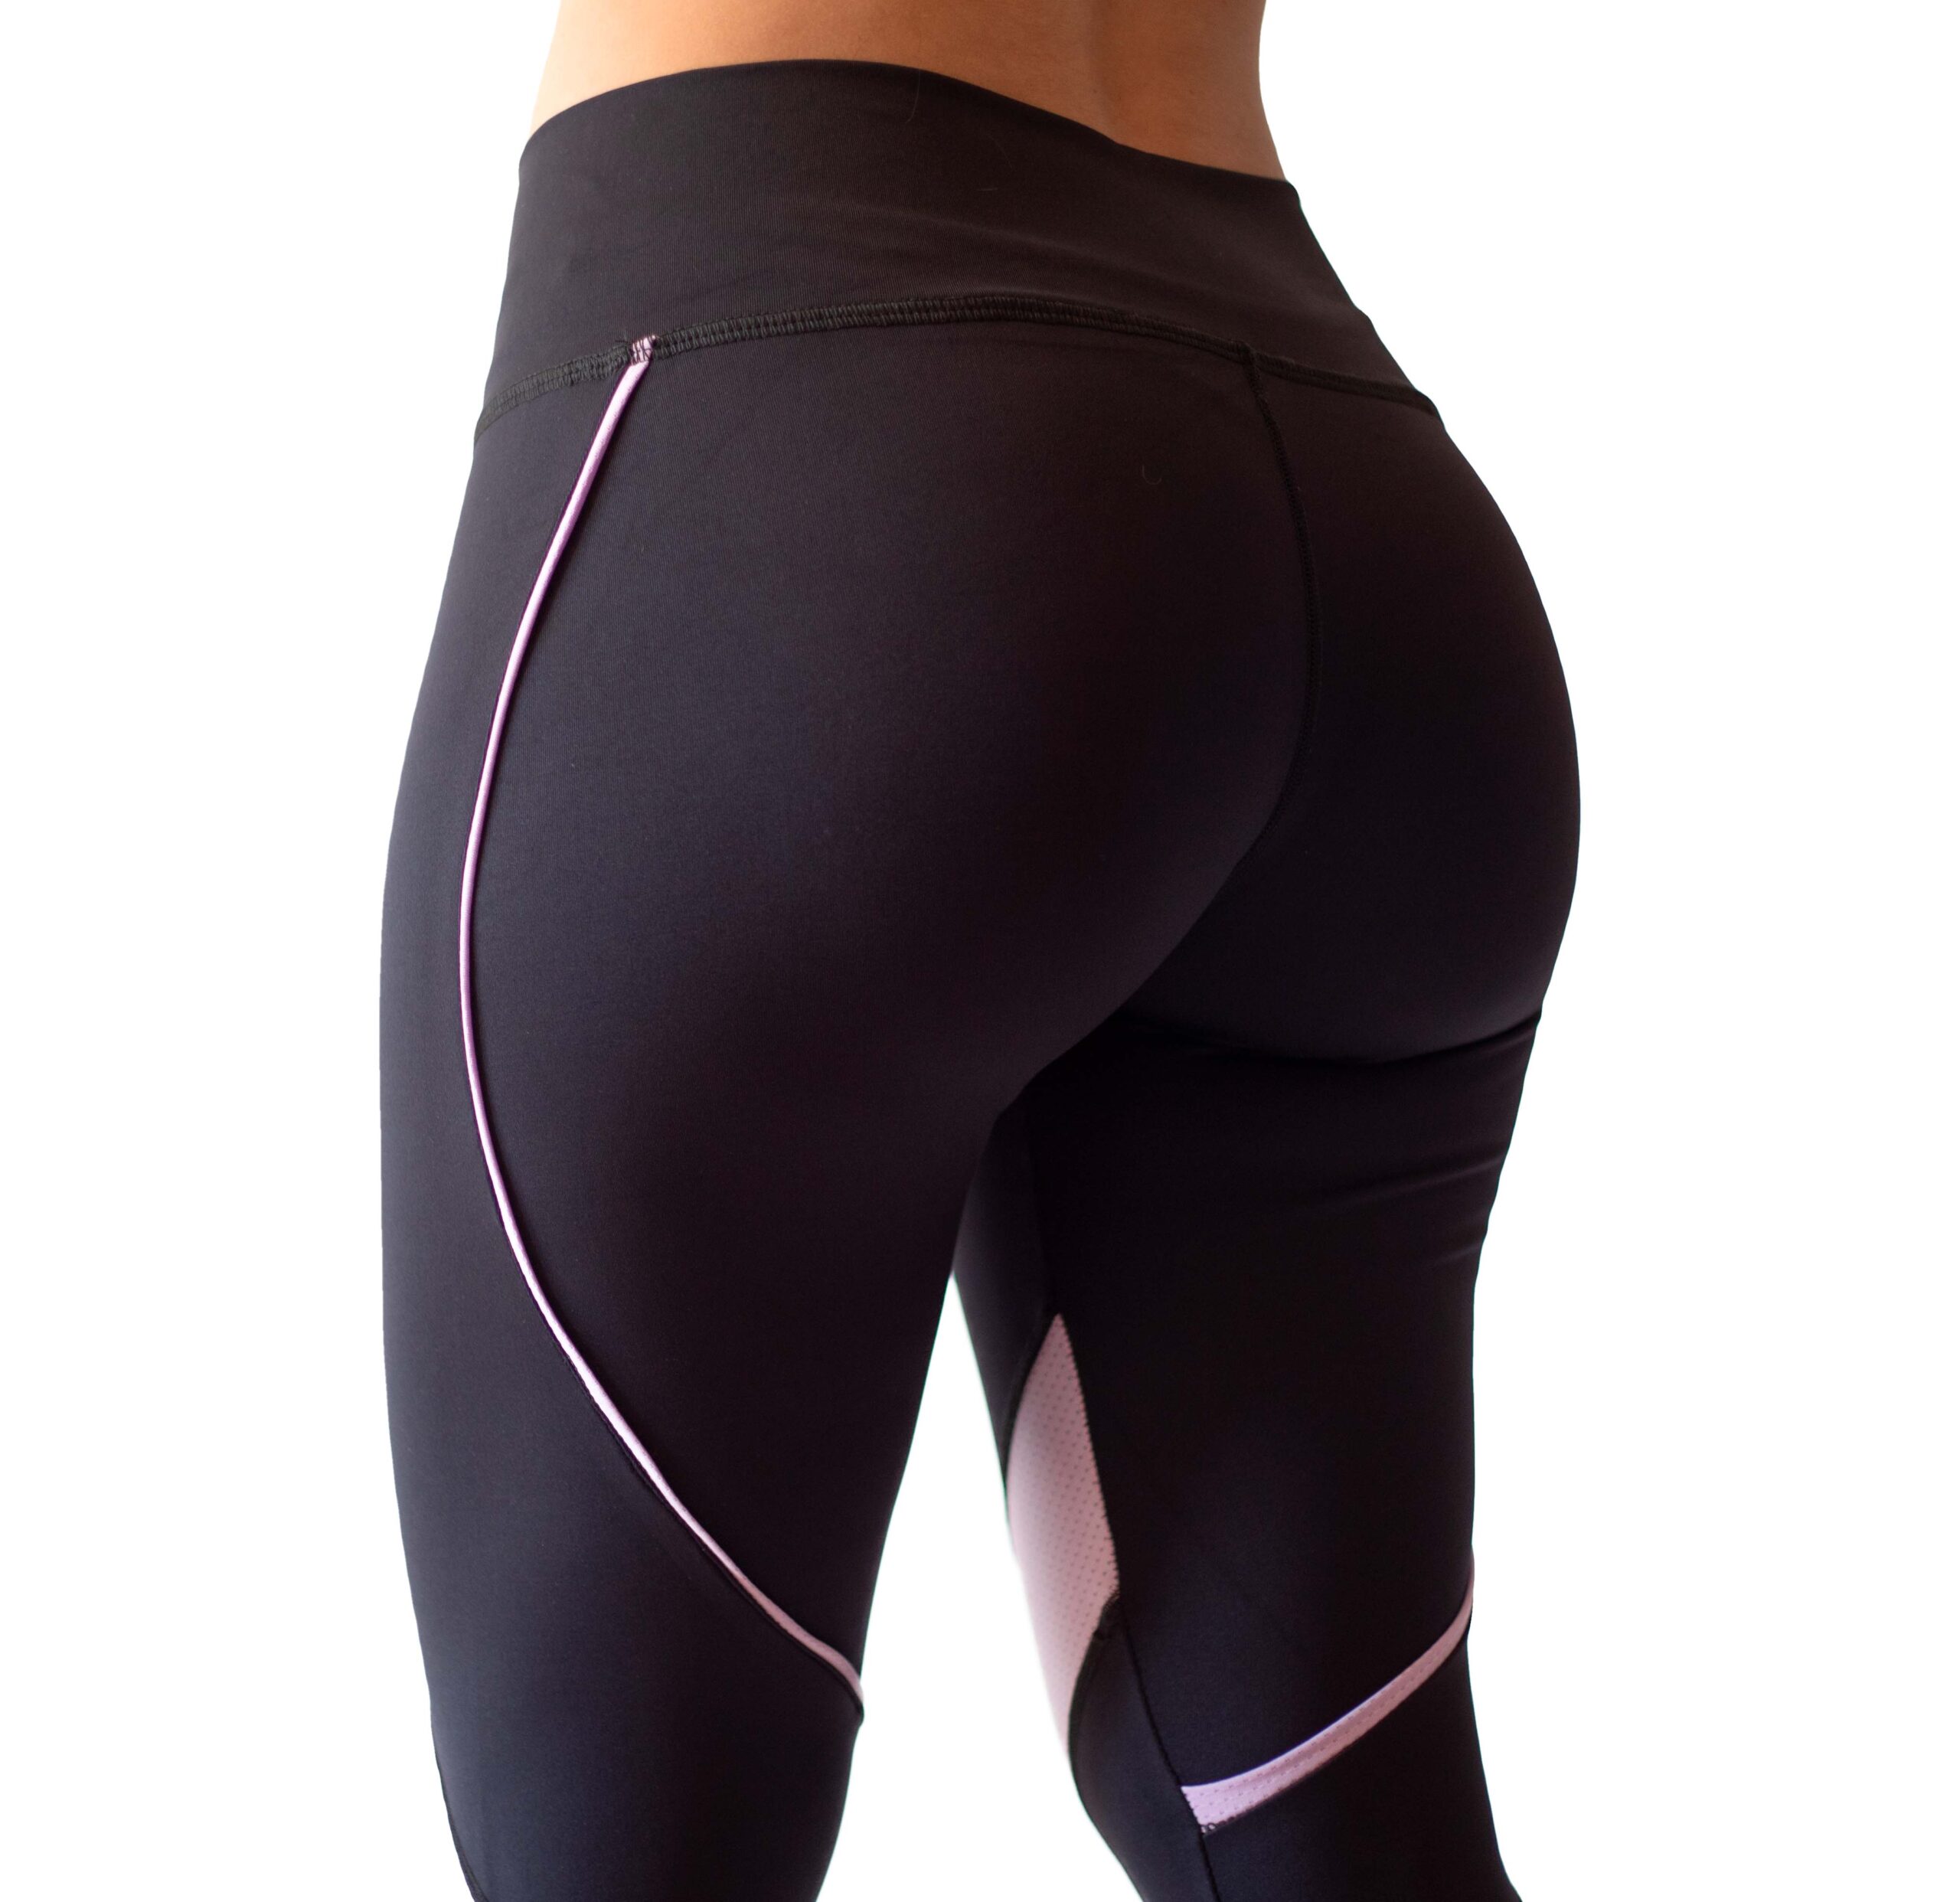 Leggings for Women / Girl Yoga Pants High Waist Tummy Control All Day  Comfort - Tolemacole